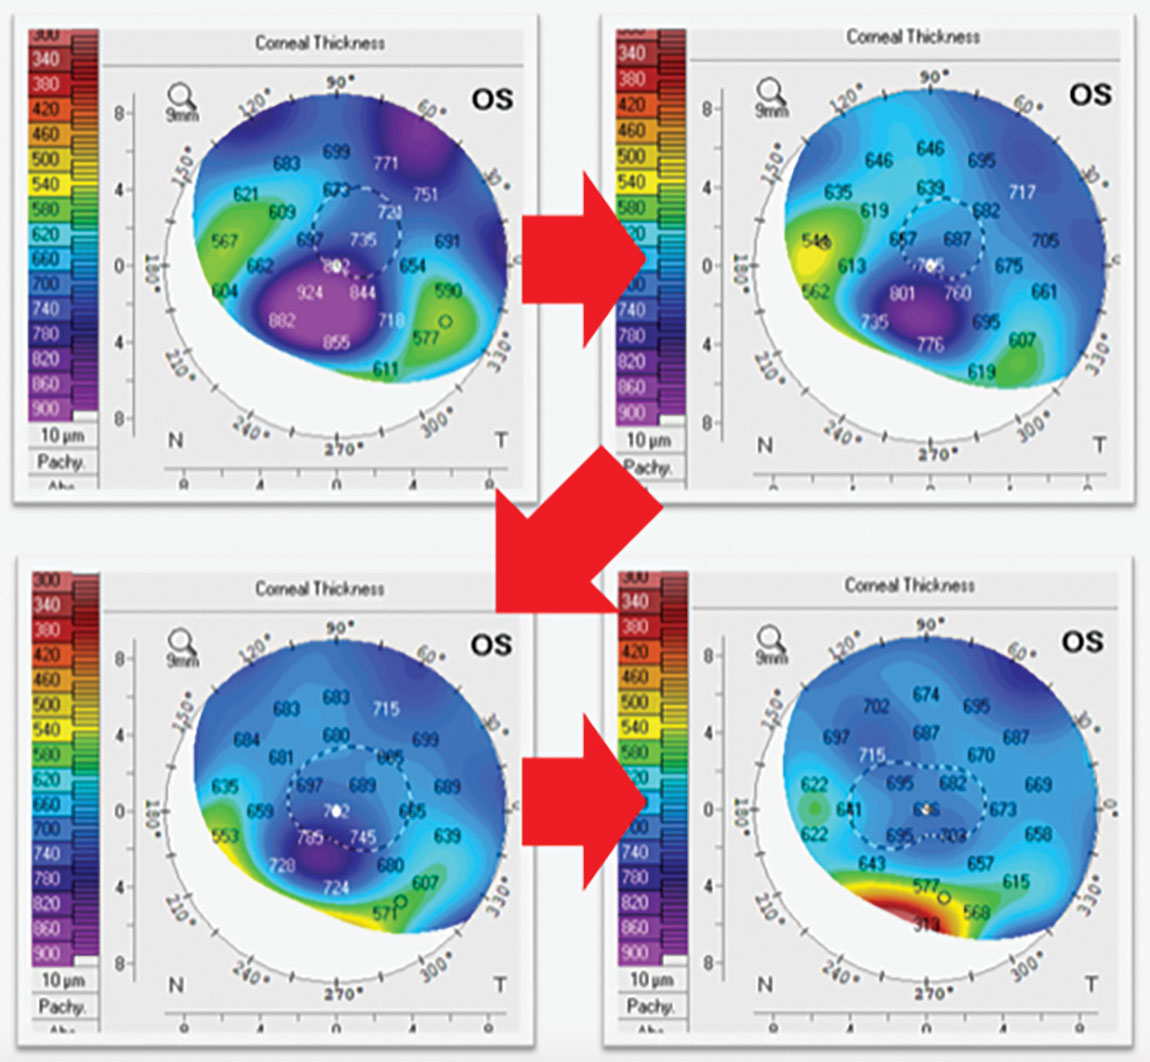 Fig. 2. Corneal pachymetry maps of a patient with corneal edema who was started on topical  rho-kinase inhibitor showing gradual improvement on edema.